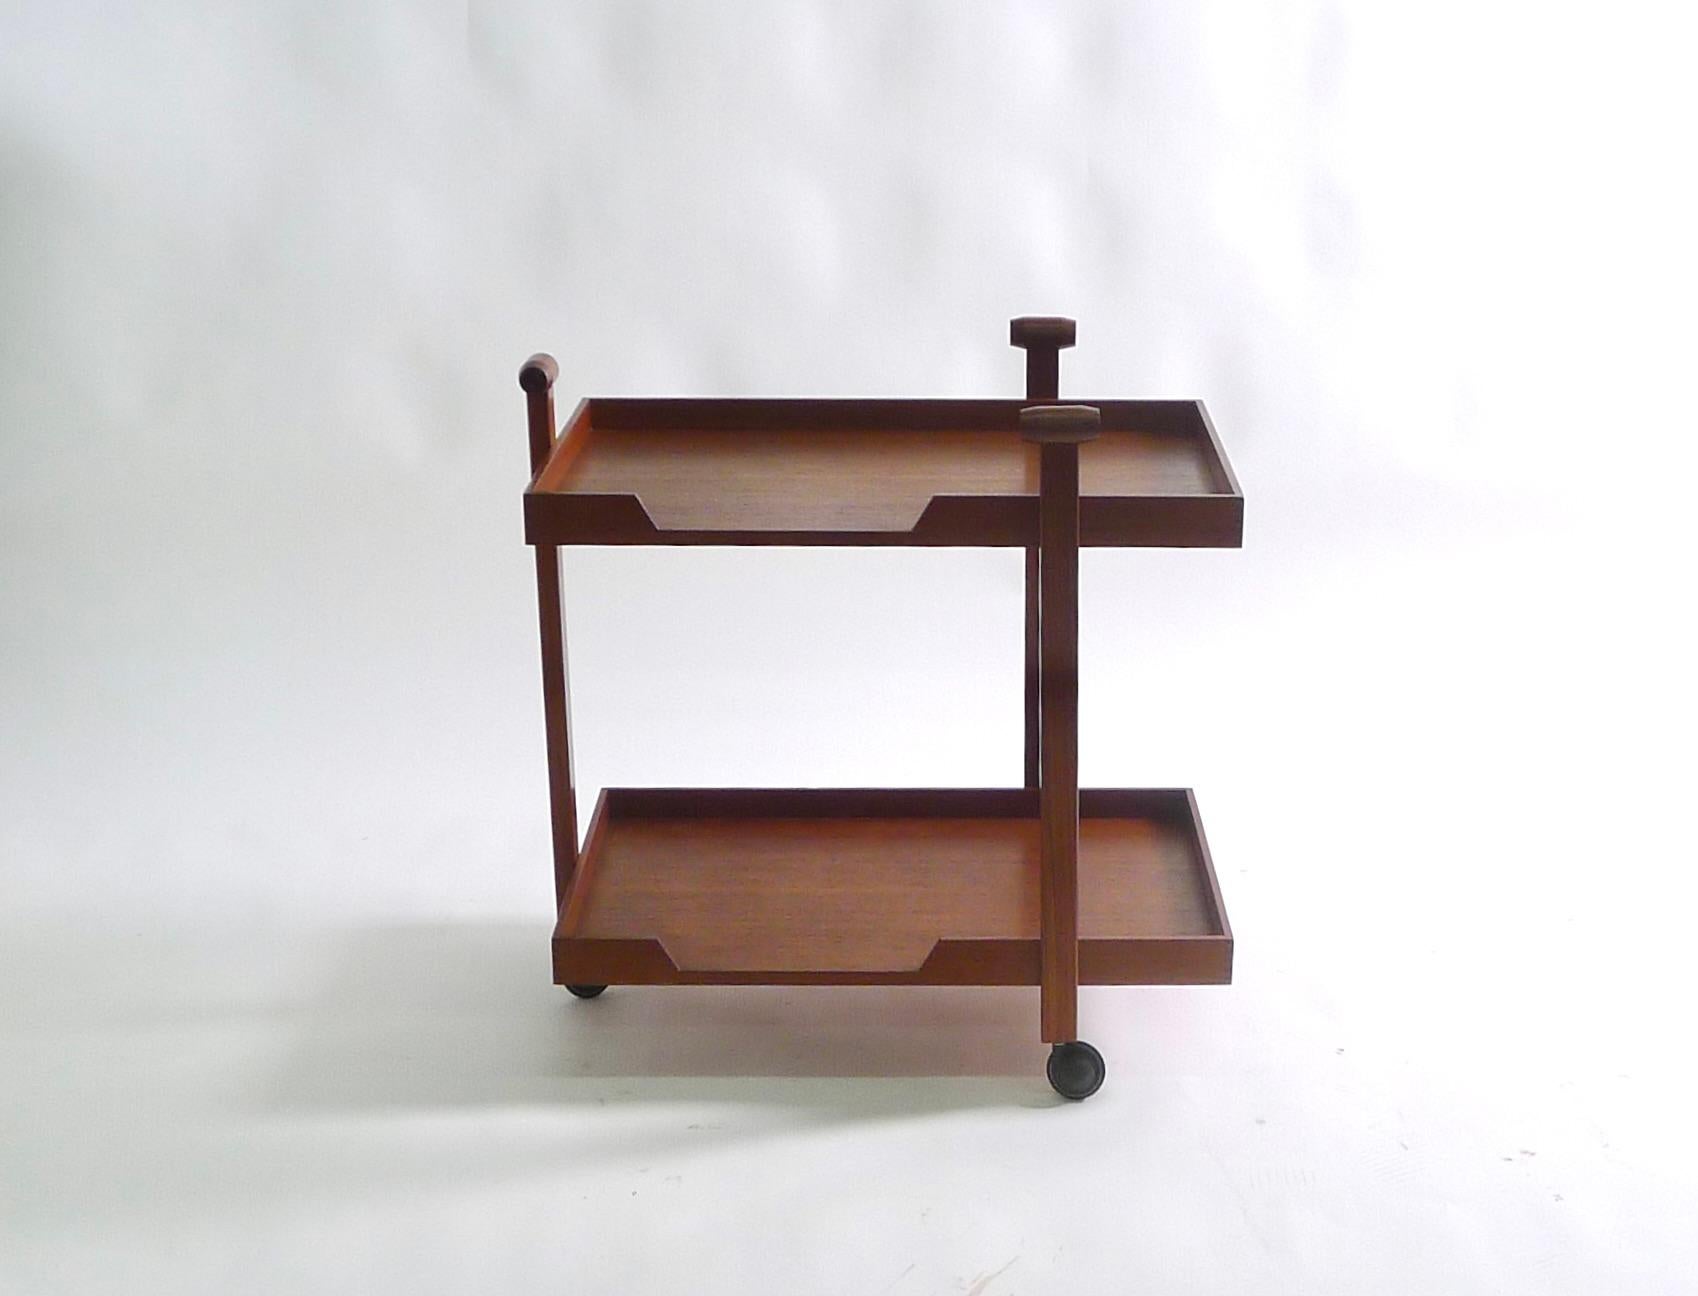 Franco Albini and Franca Helg, model CR20 teak serving trolley, designed 1958 and manufactured in late 1950s/early 1960s by Poggi, Italy

68cm wide, 45.5cm deep, 68.5cm high

In very good condition with lovely patina to the teak platforms. On